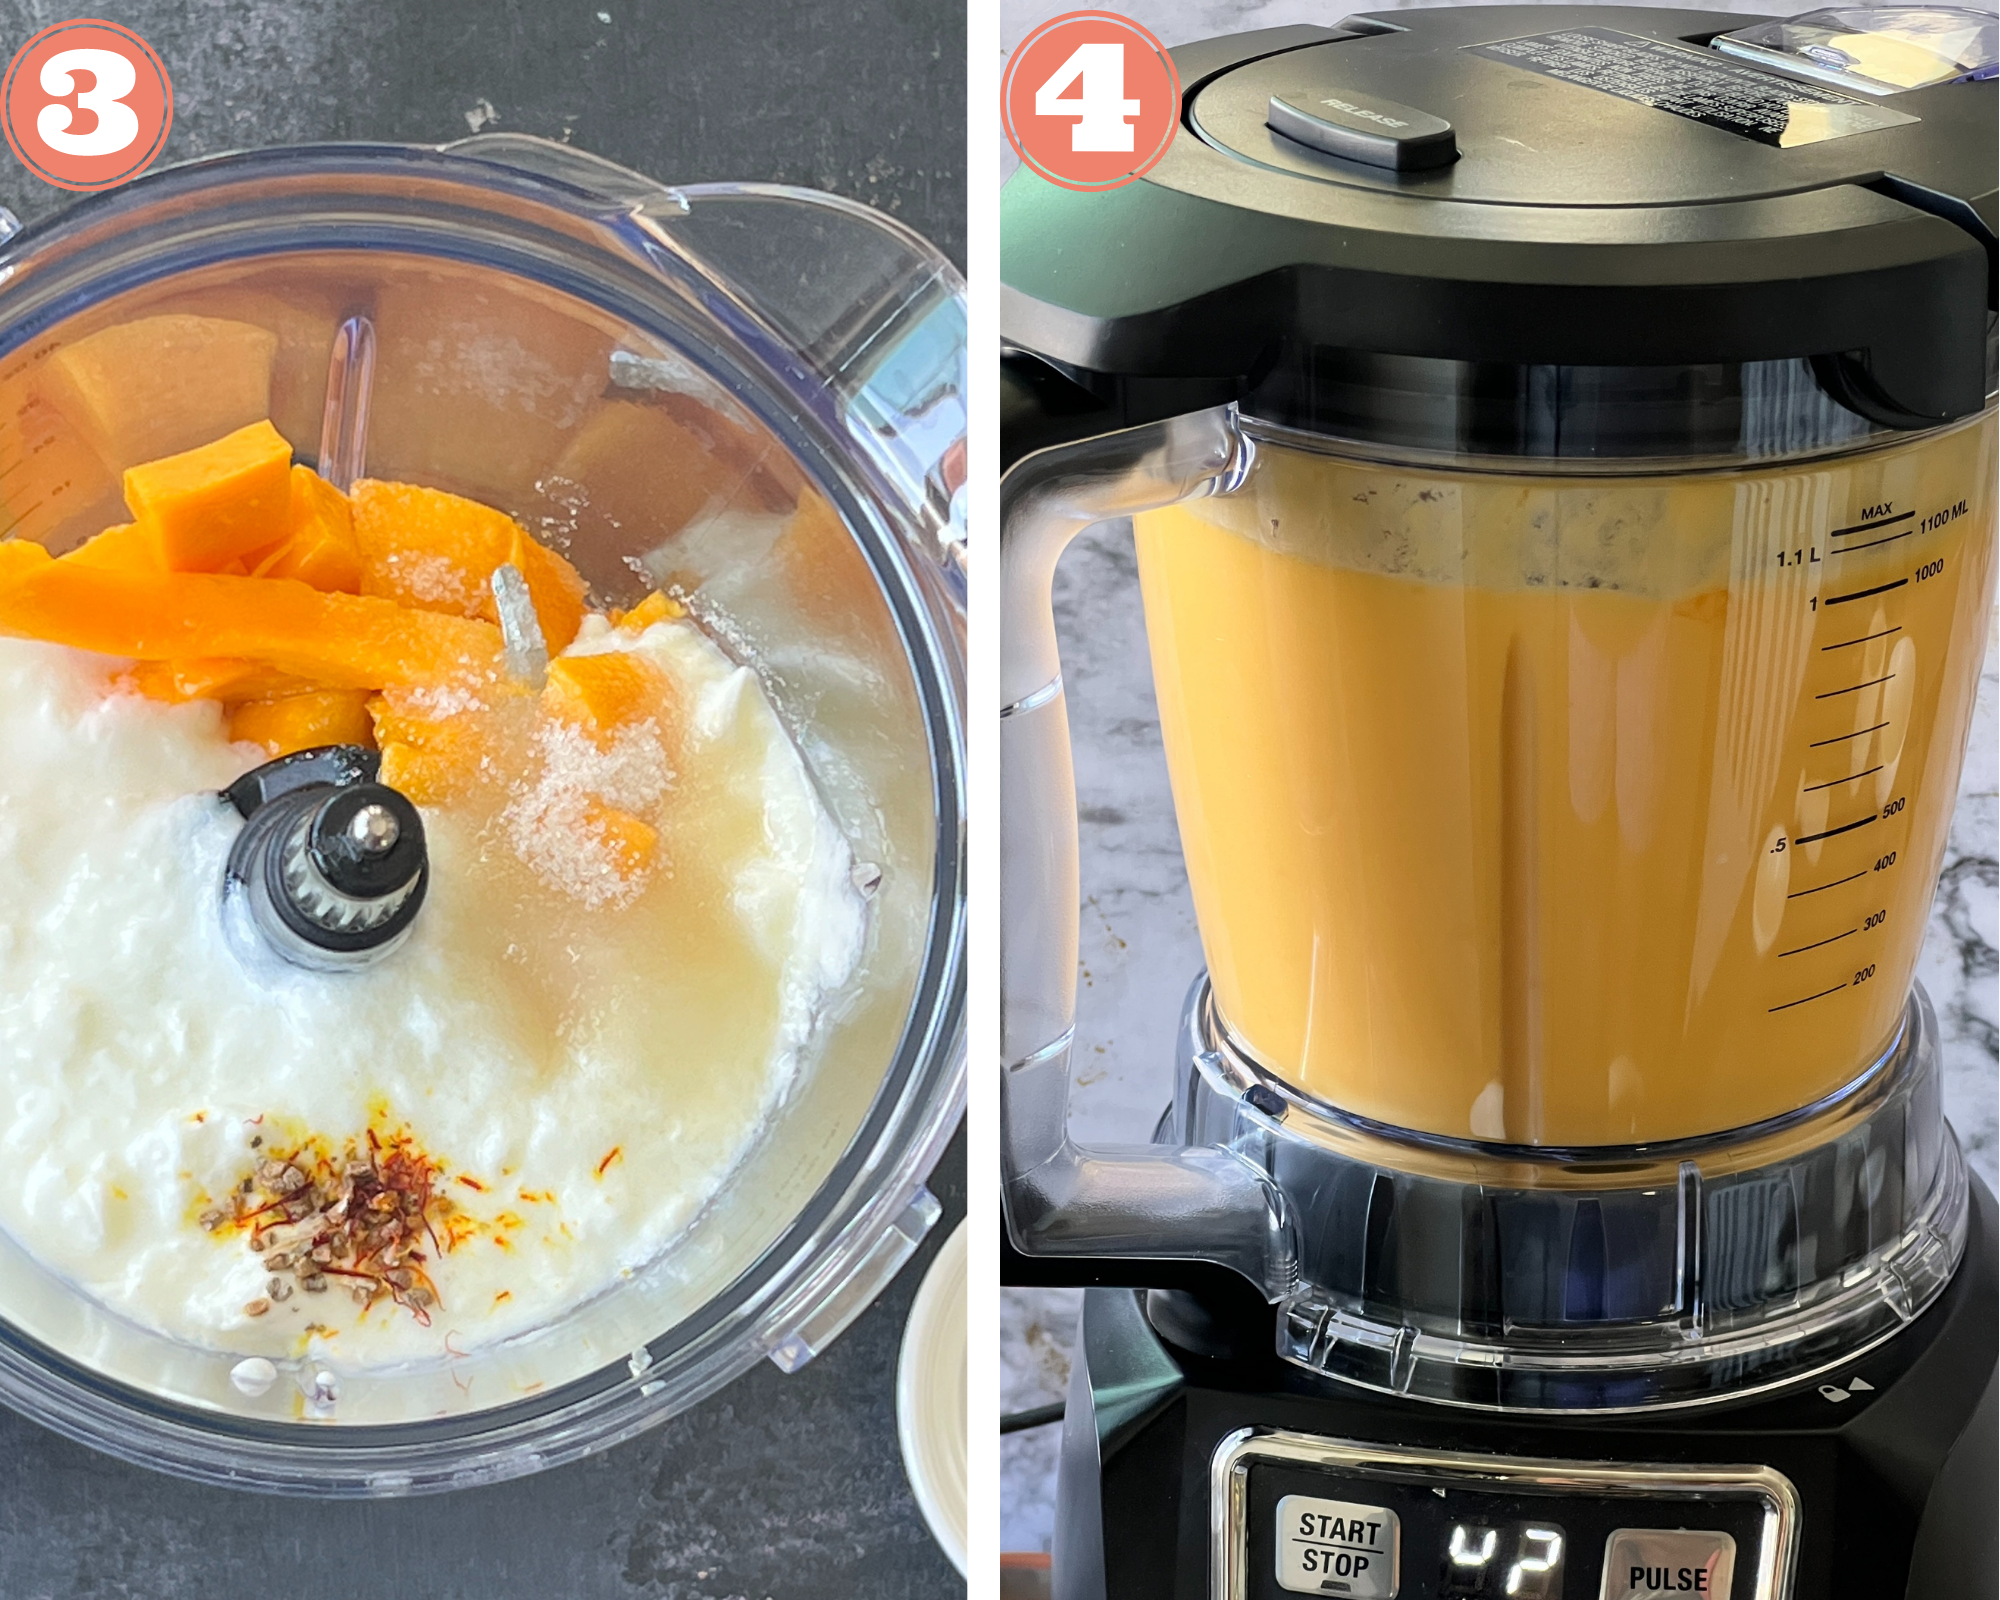 How to make Mango Lassi: Add yogurt, sugar and mango to a blender and blend till smooth.